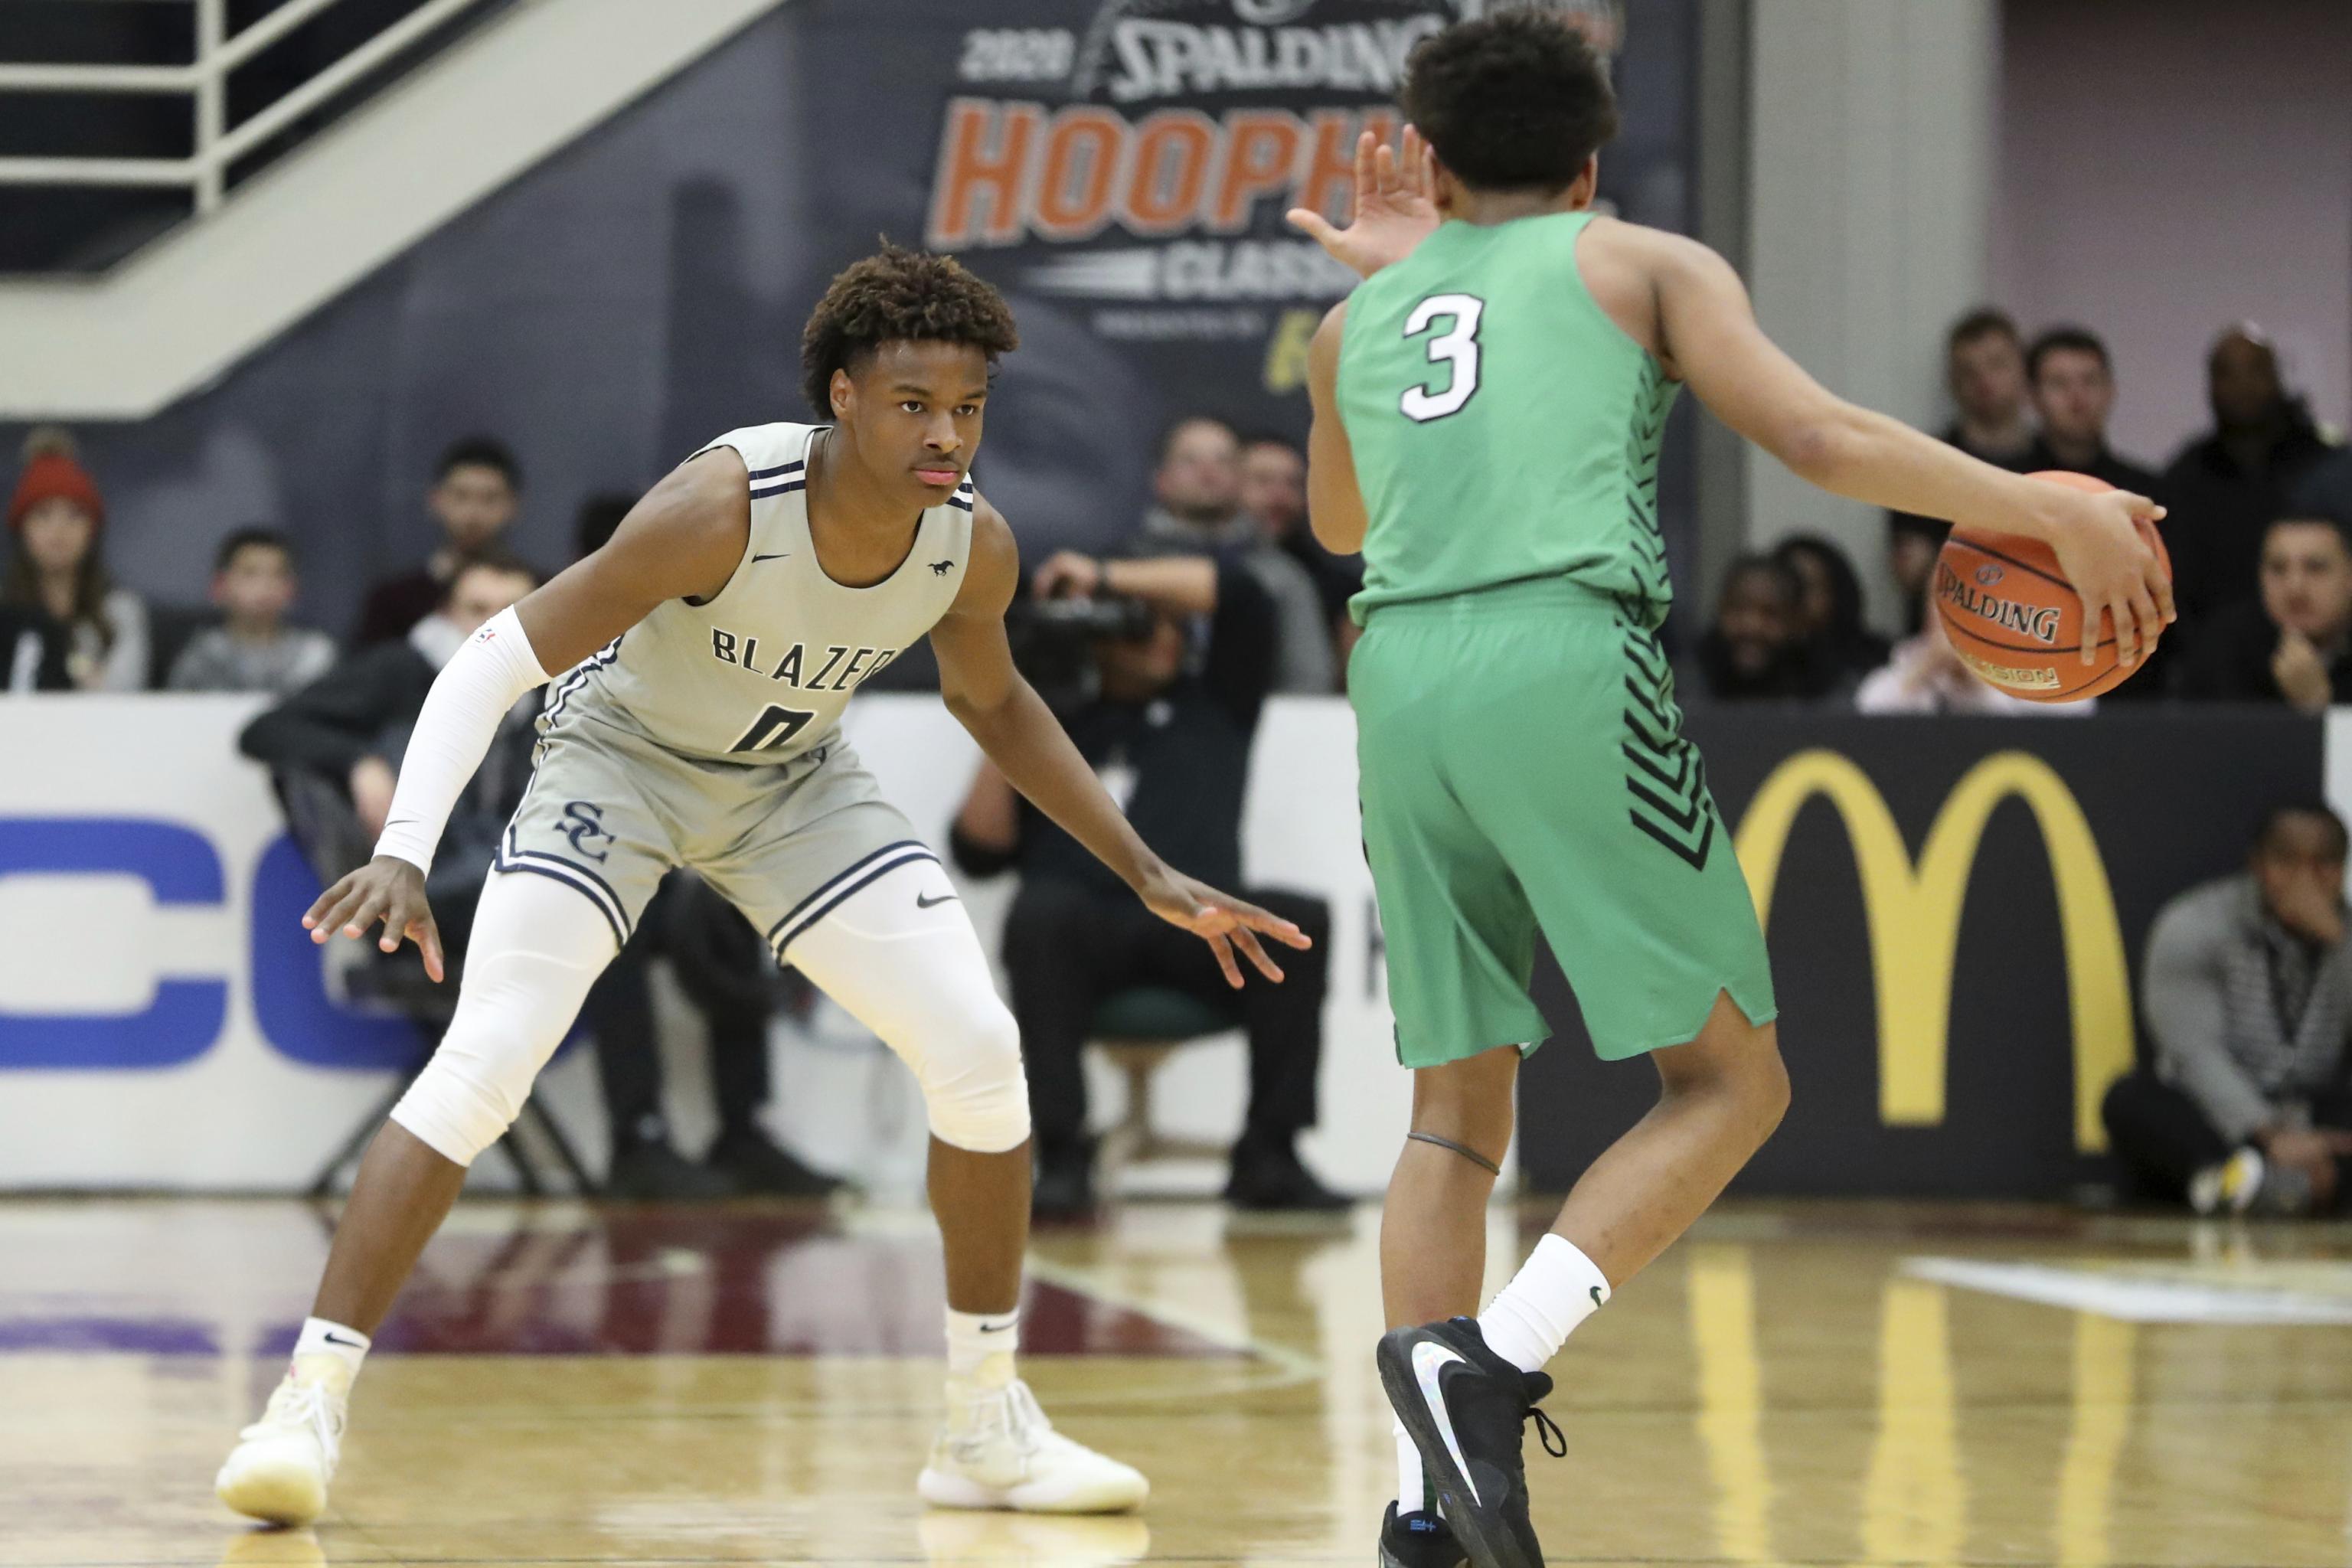 Bronny James, Zaire Wade expected to attend Sierra Canyon – The